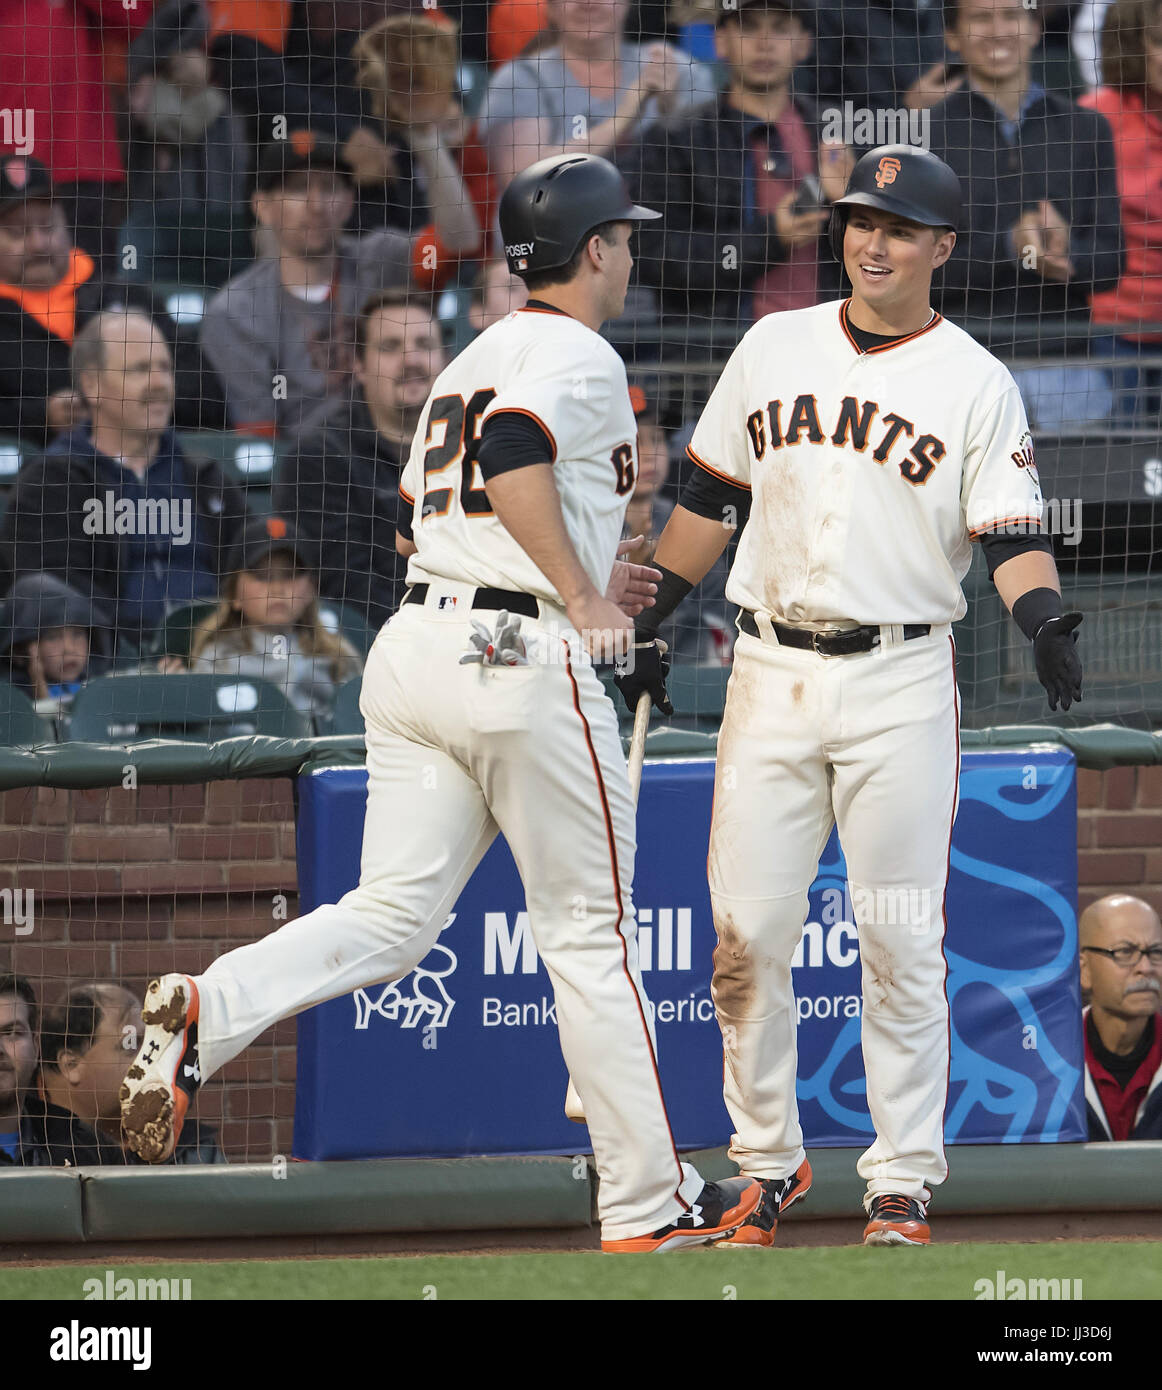 San Francisco, California, USA. 17th July, 2017. San Francisco Giants second baseman Joe Panik (12) congratulates catcher Buster Posey (28) after scoring to make it 3-1 Giants during the fourth inning, of a MLB baseball game between the Cleveland Indians and the San Francisco Giants at AT&T Park in San Francisco, California. The Indians won 5-3. Valerie Shoaps/CSM/Alamy Live News Stock Photo